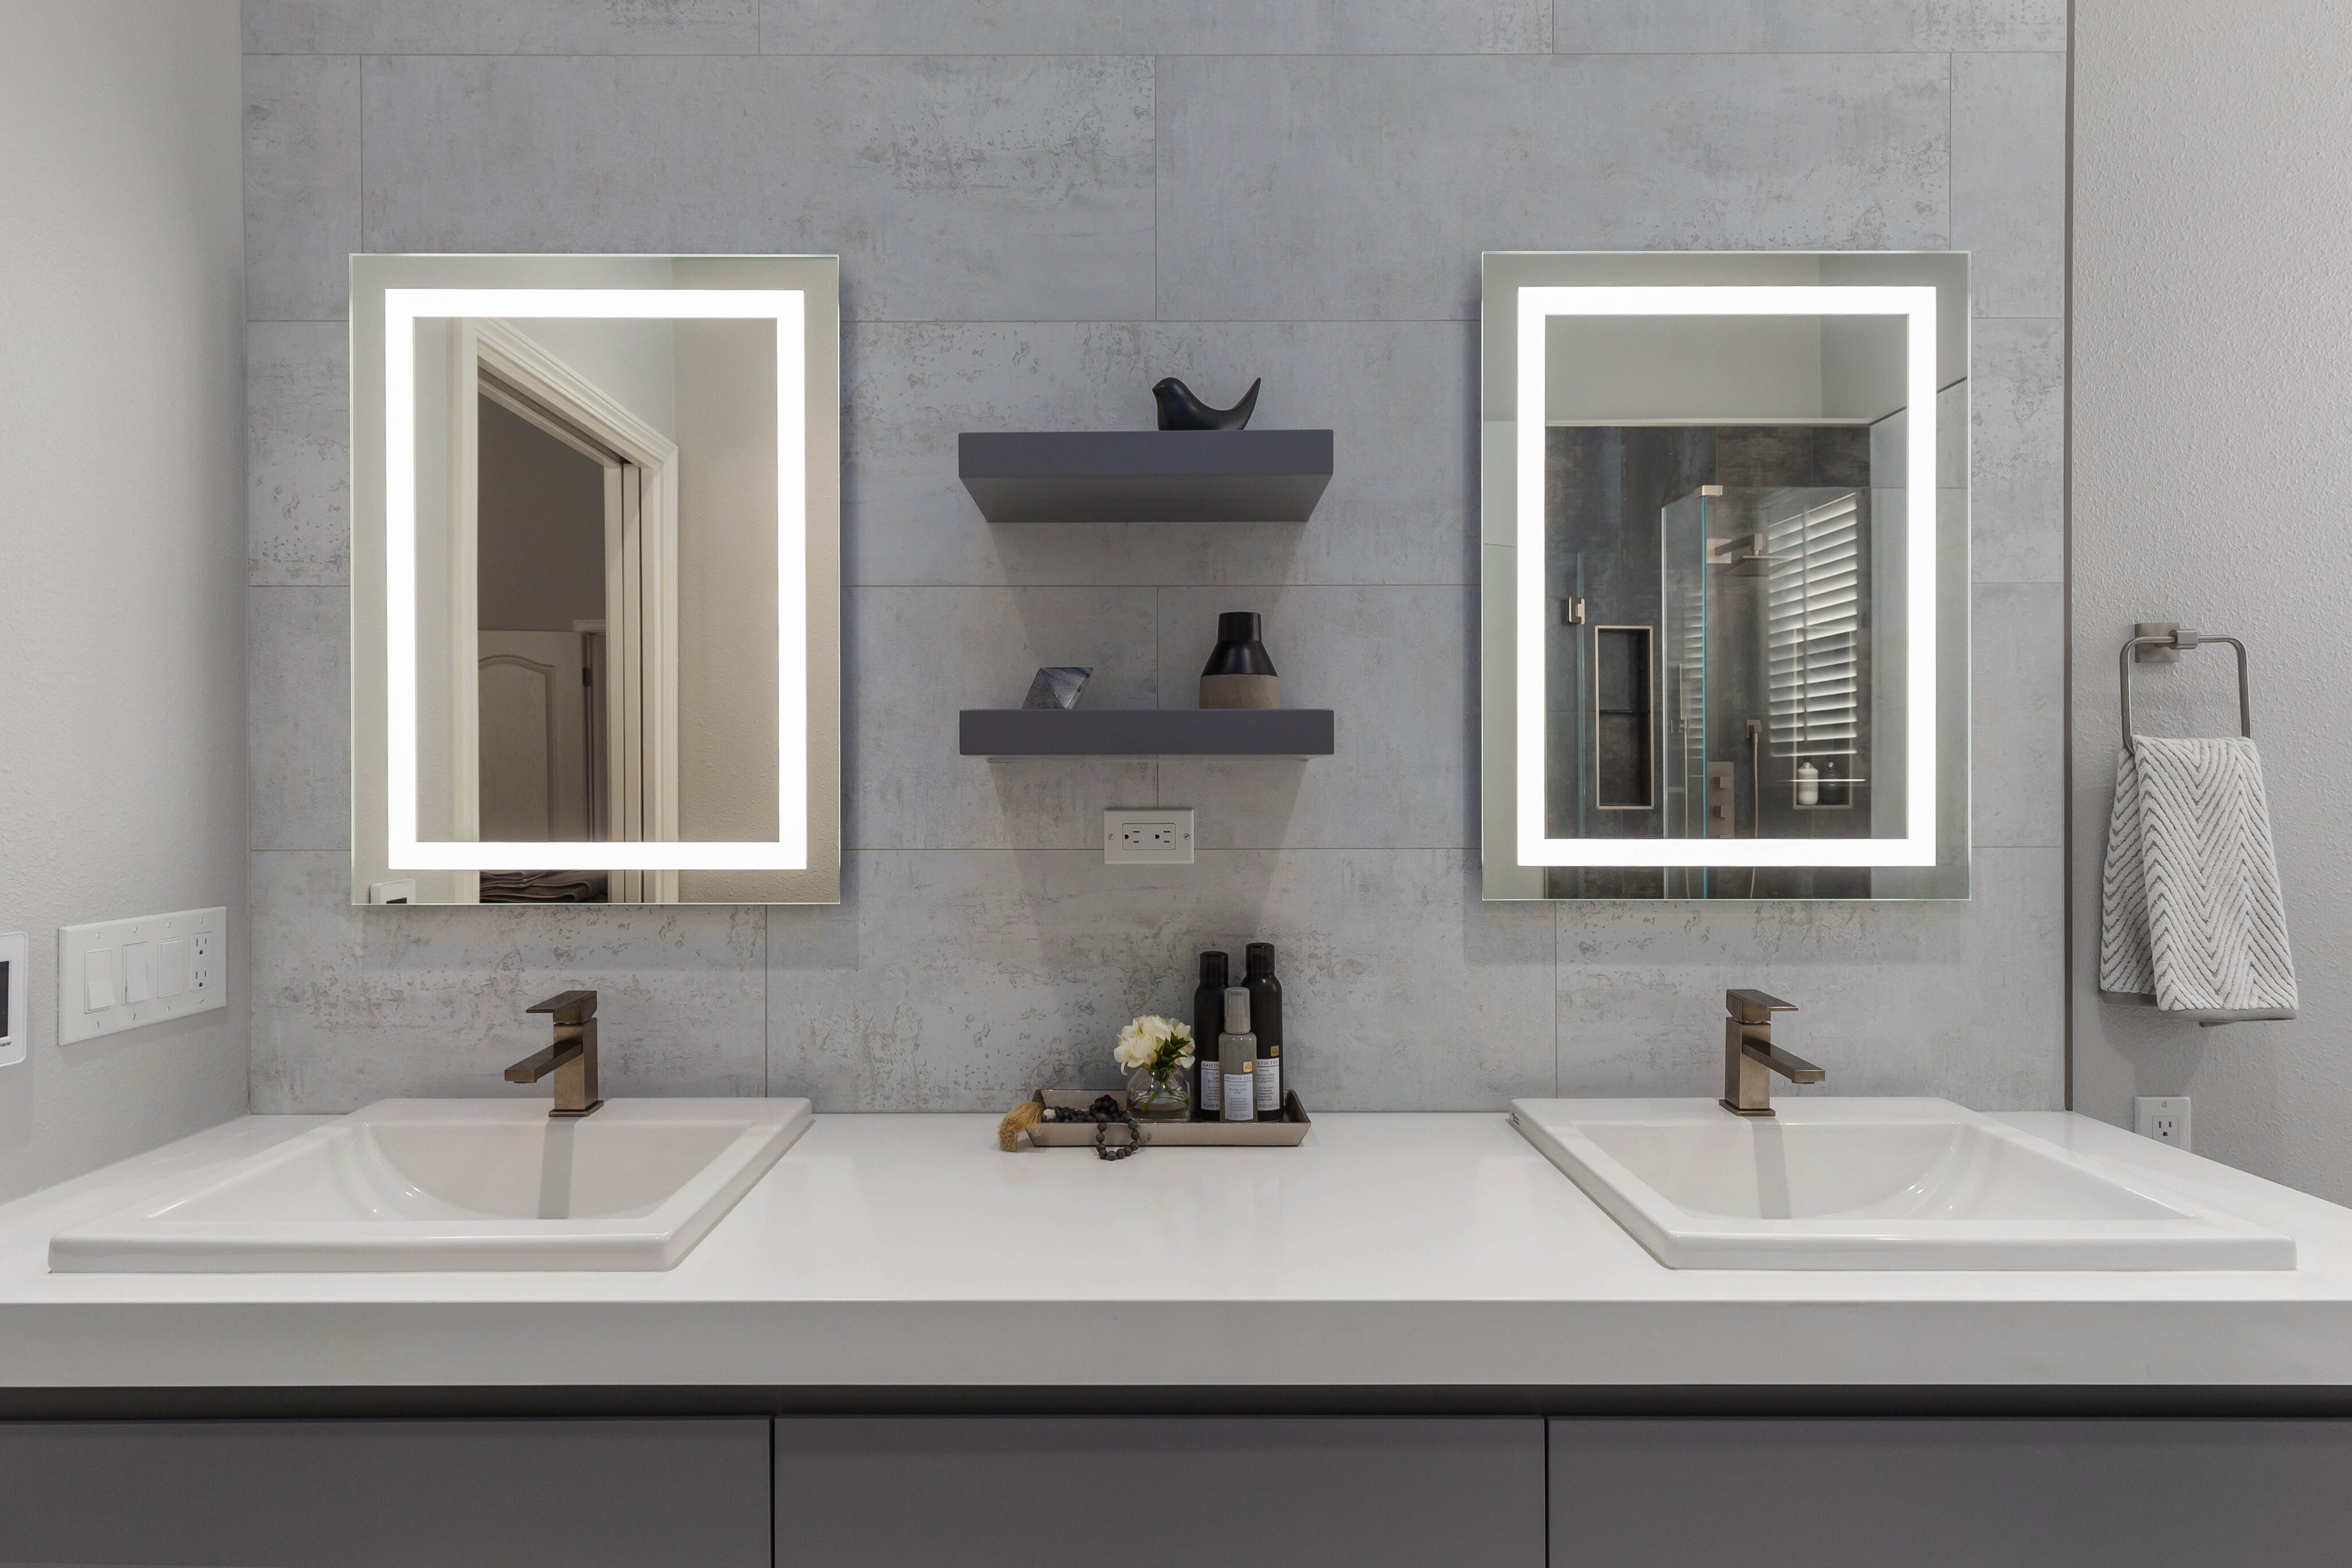 Mirrors-with-lighting-built-in-can-be-a-creative-way-to-rethink-lighting-bathroom-design